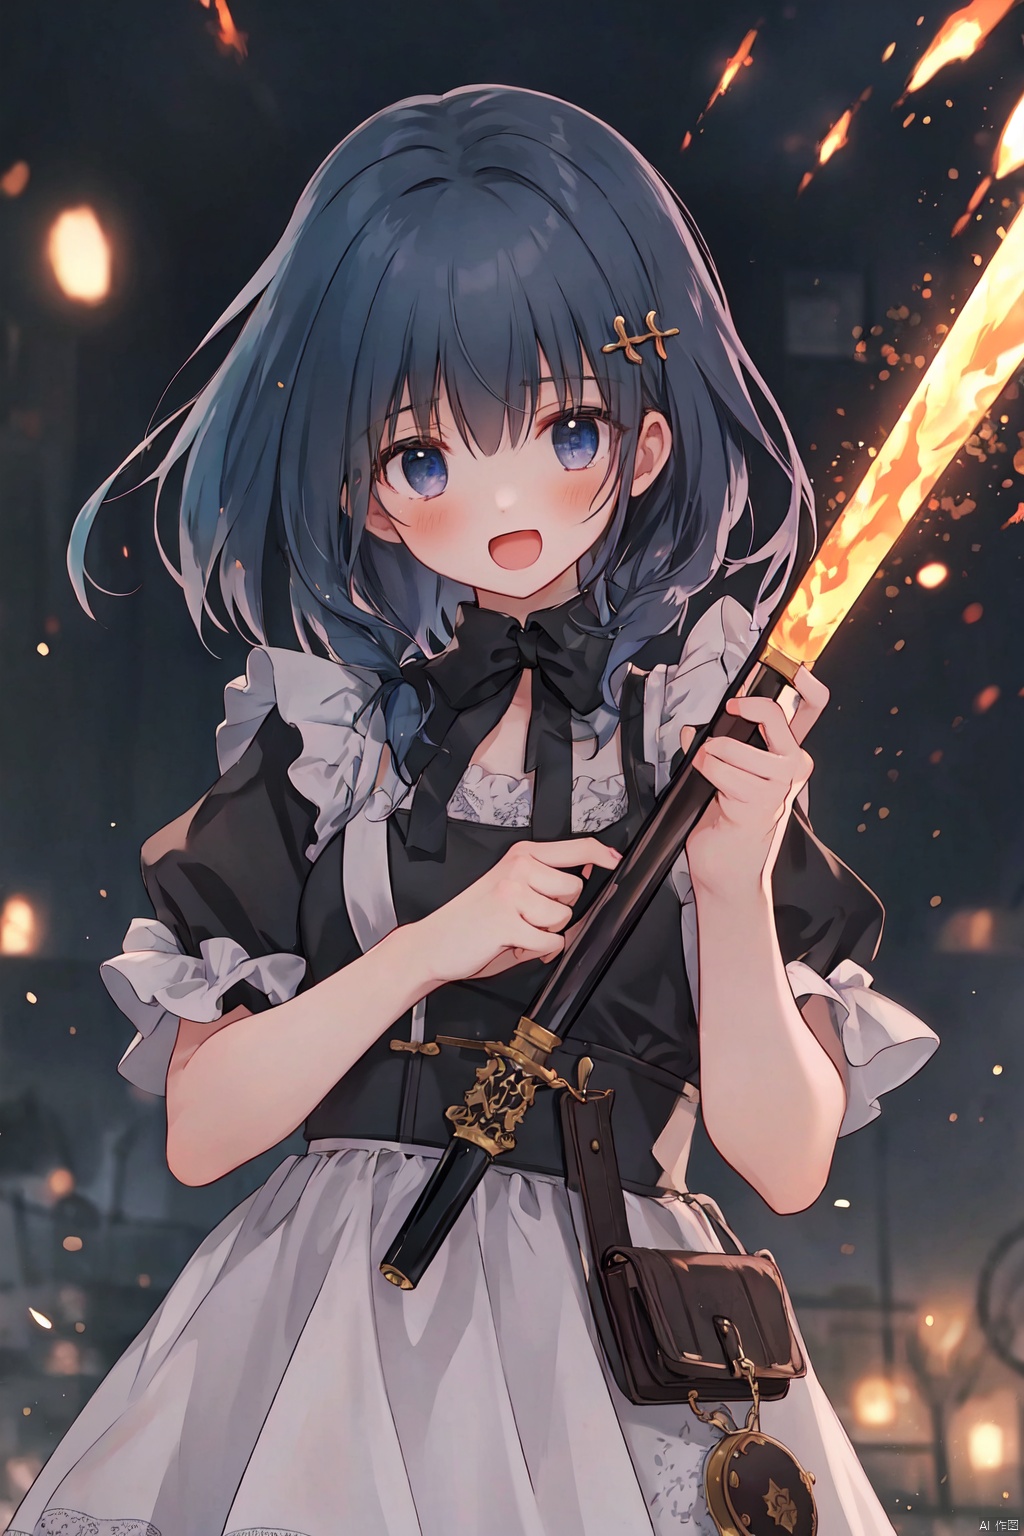  hanasakichu,(Masterpiece,Best Quality), A realistic anime girl in a maid dress with coal-colored hair, striking a battle pose with a spear, inviting viewers to look closely at the high-resolution illustration, Fantasy, magical vibes, sci-fi mood, sparks, DoF, bokeh, sharp focus
